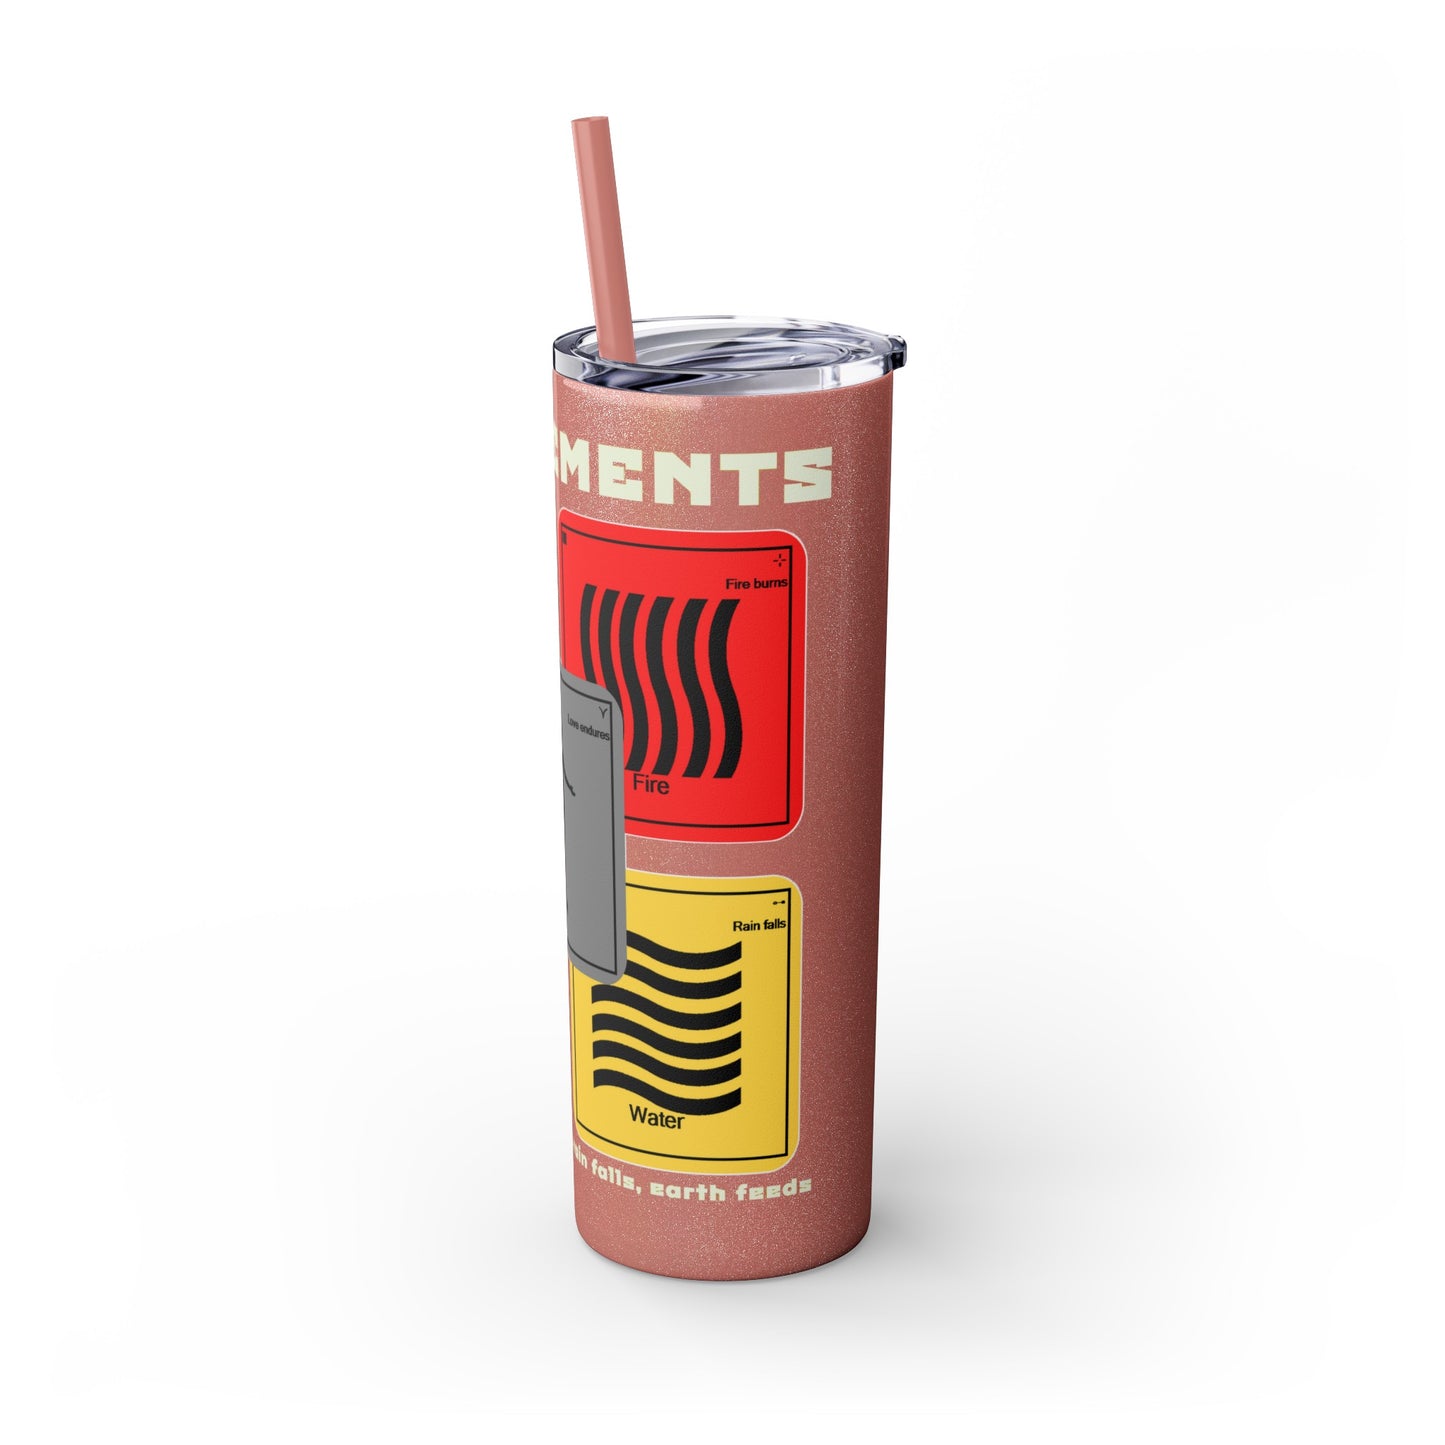 The Elements Skinny Tumbler with Straw, 20oz